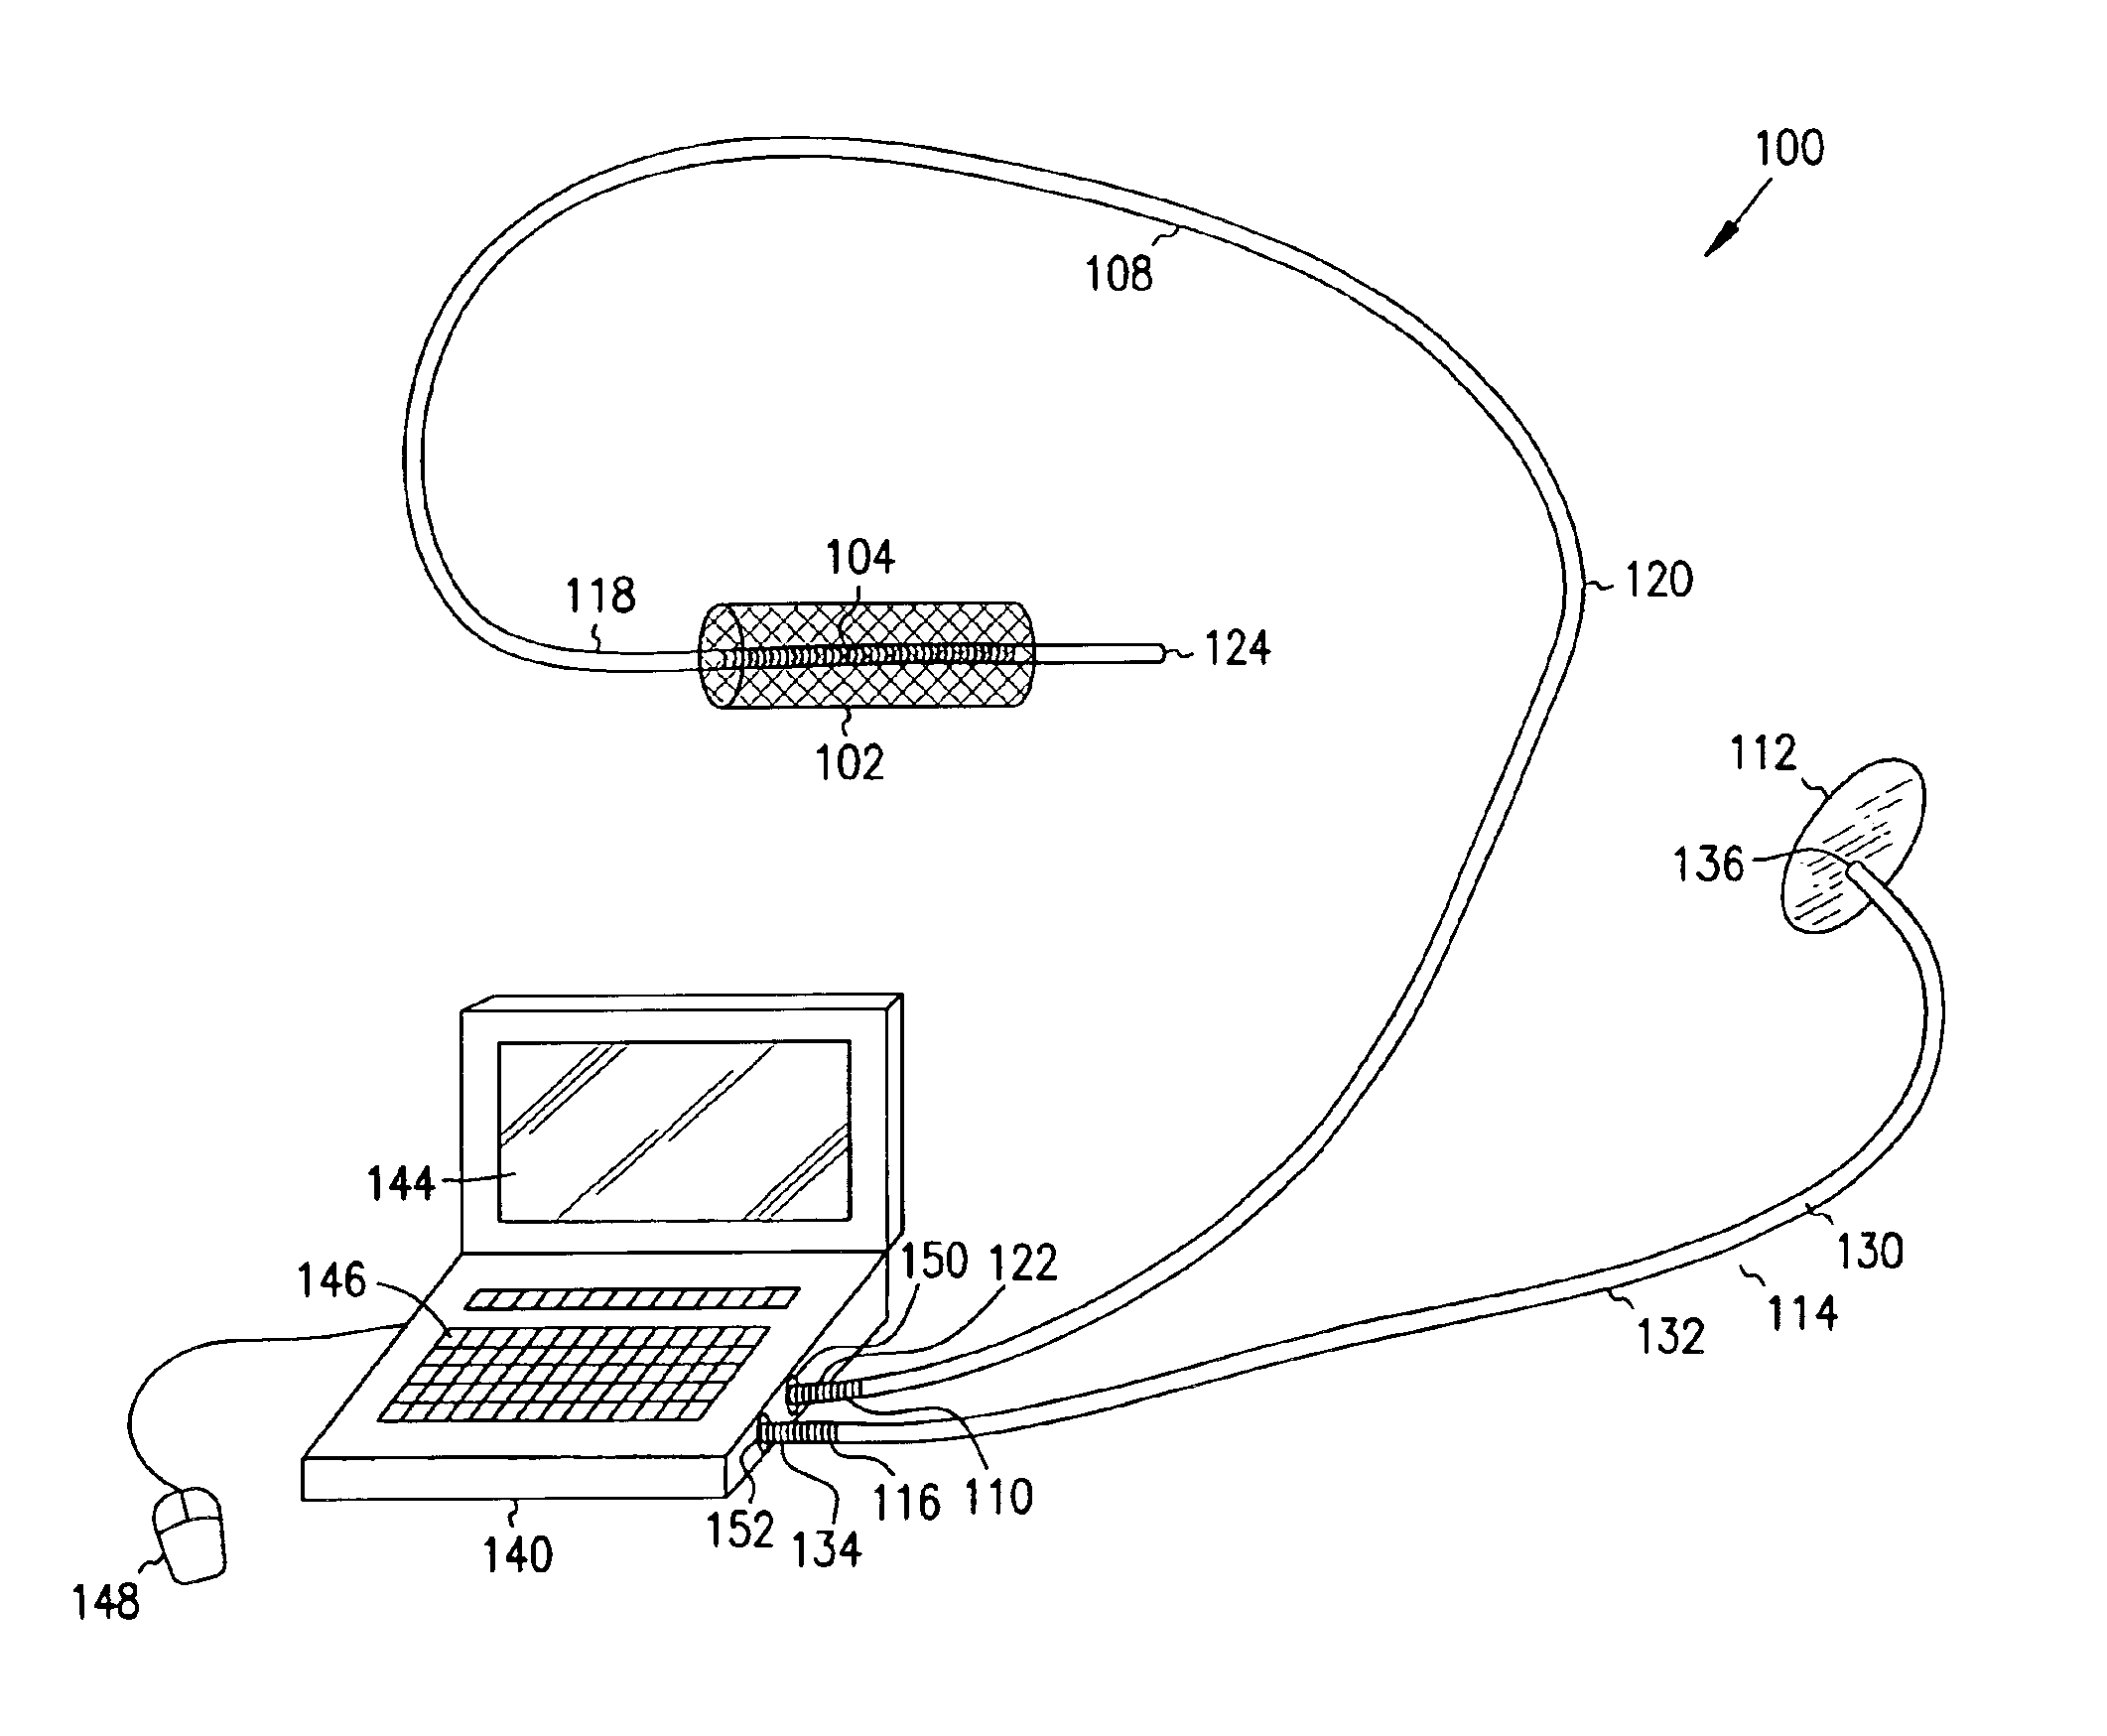 Method for reducing restenosis in the presence of an intravascular stent